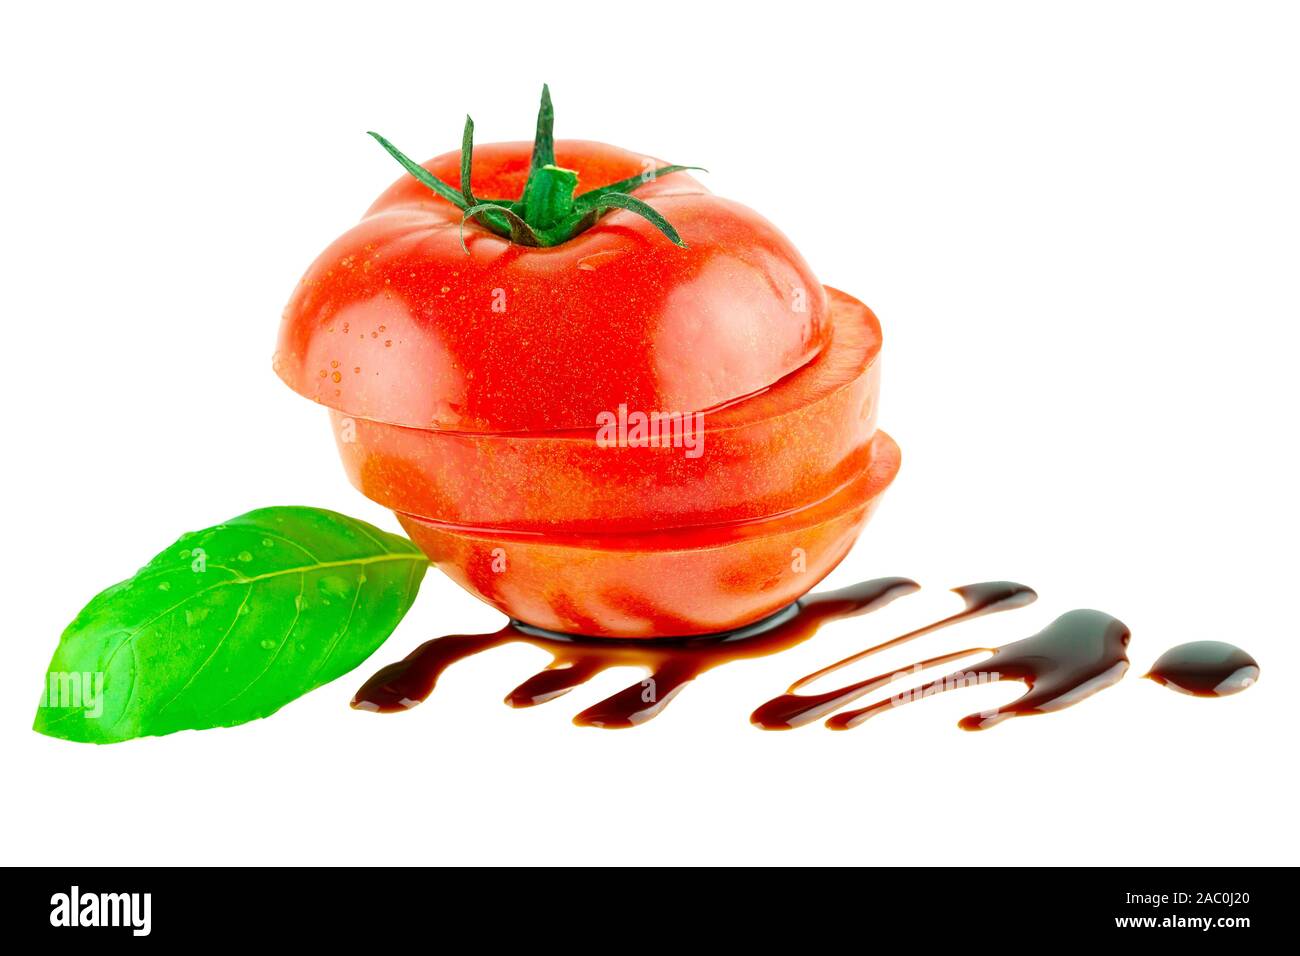 Tomato slisec with green basil leaf and balsamic vinegar isolated Stock Photo